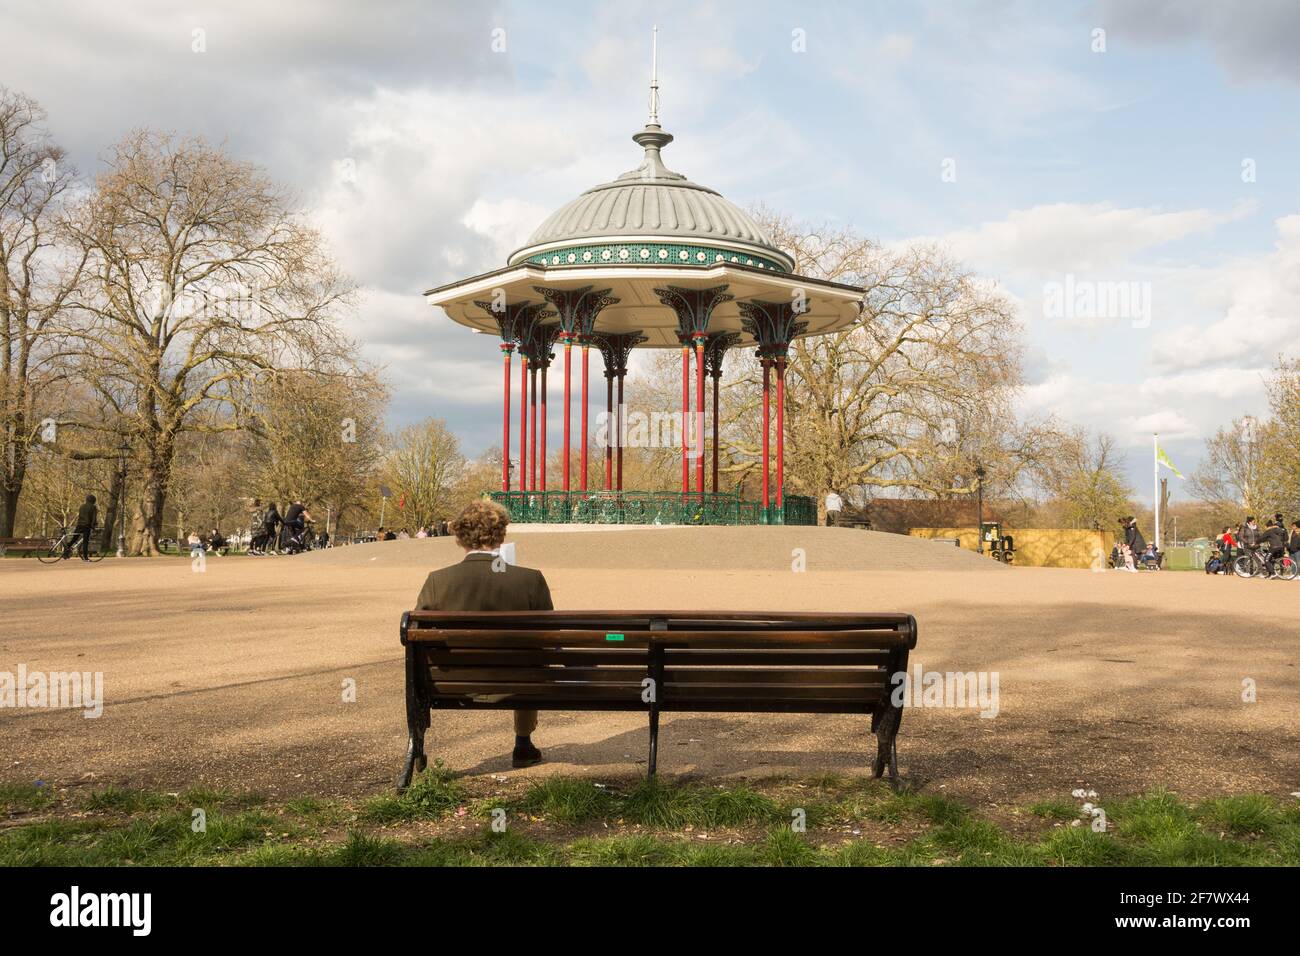 A middle-aged man sitting on a park bench near Clapham Common Bandstand, Windmill Drive, Clapham Common, Clapham, SW4, London, England, U.K. Stock Photo